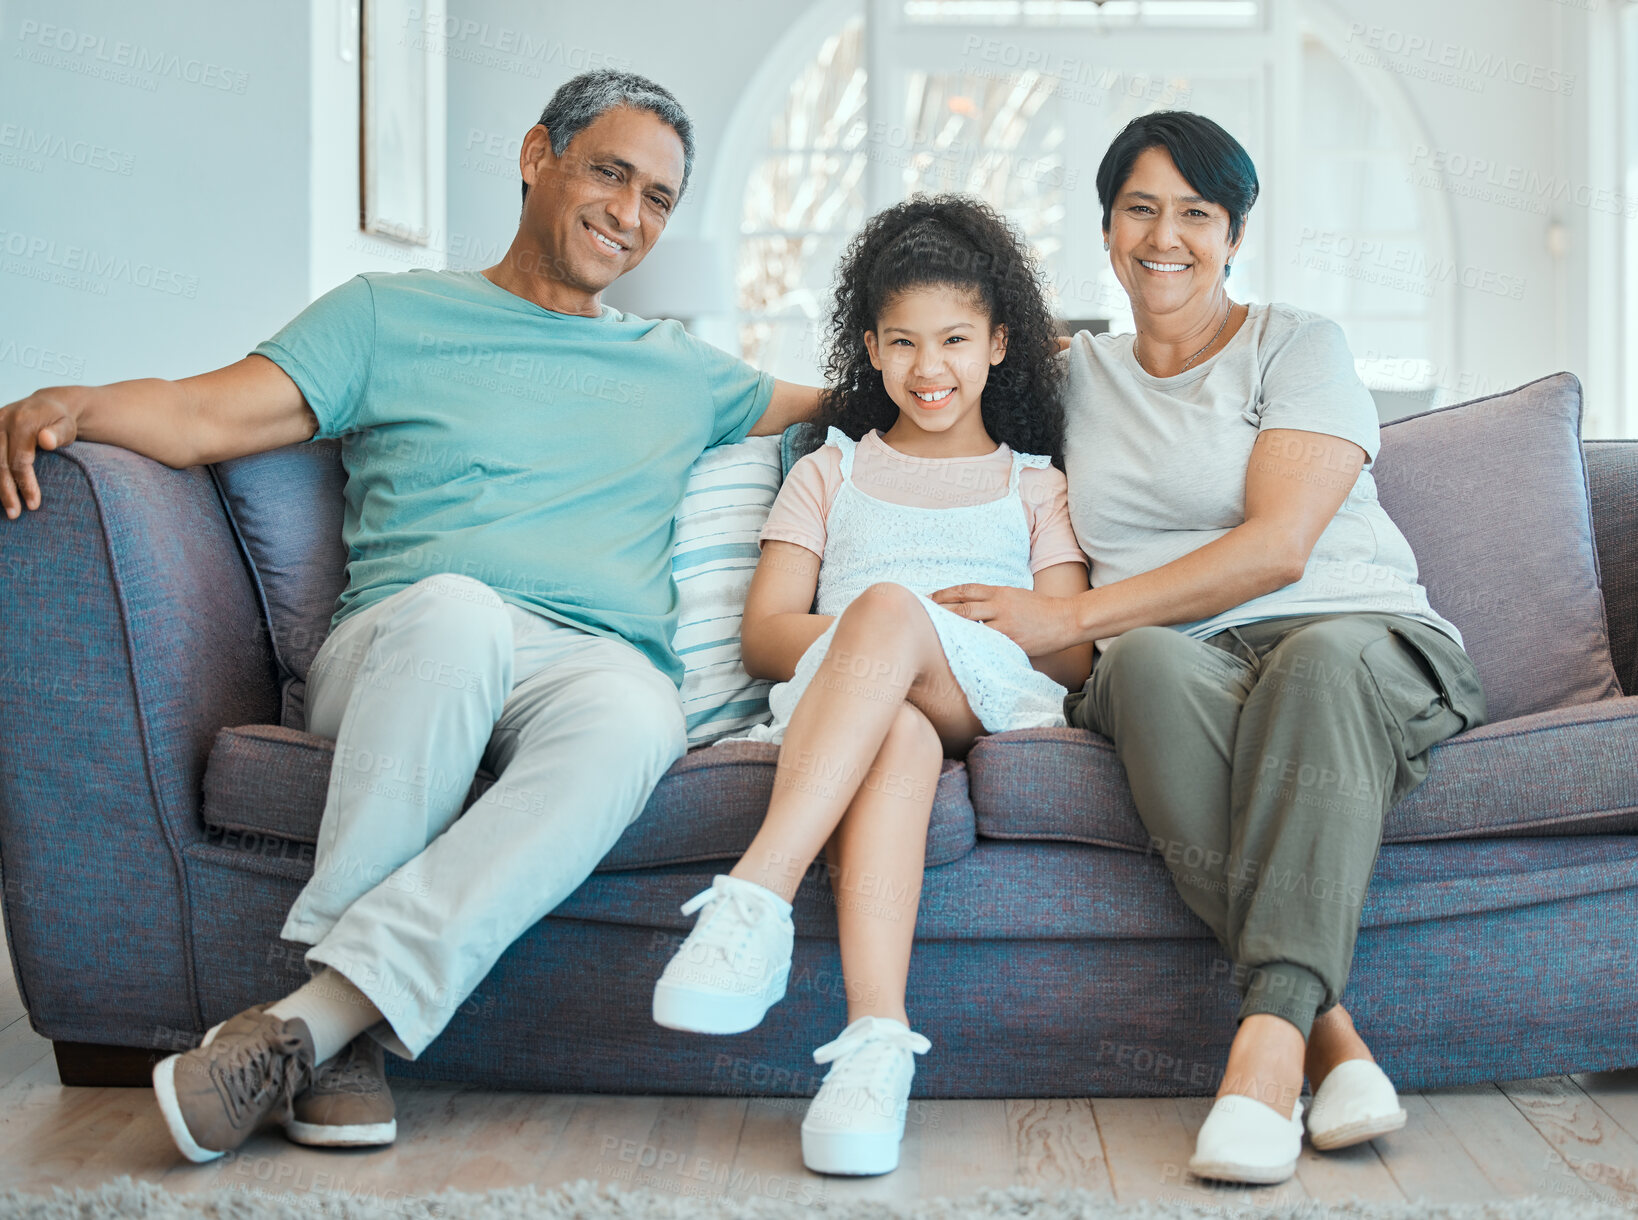 Buy stock photo Shot of two grandparents bonding with their grandchild on a sofa at home